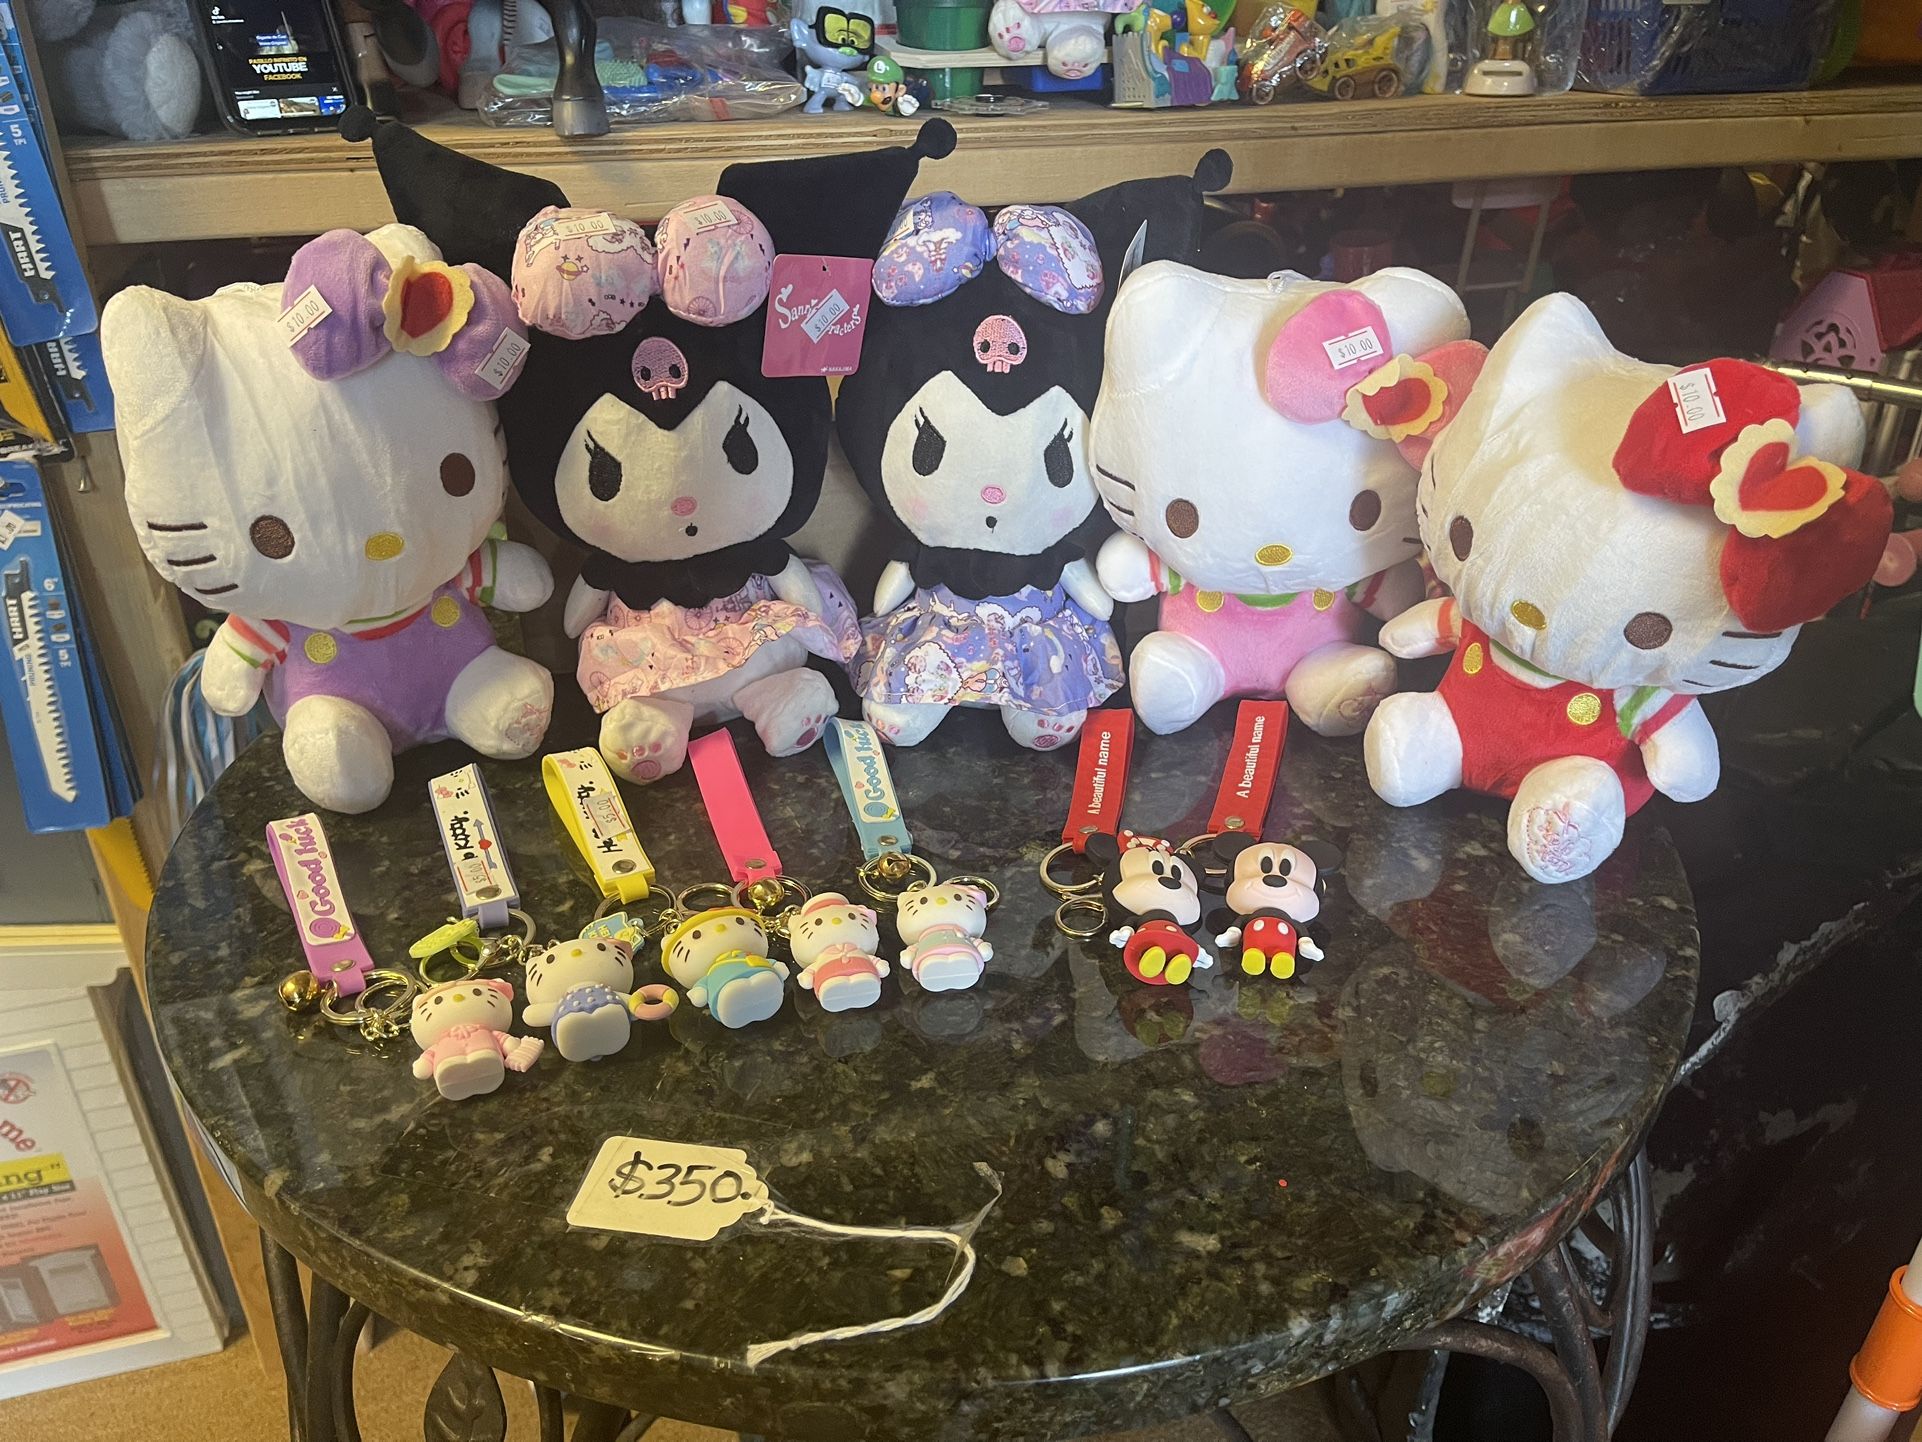 New Hello kitty plushies $10 each and key chains $5 each